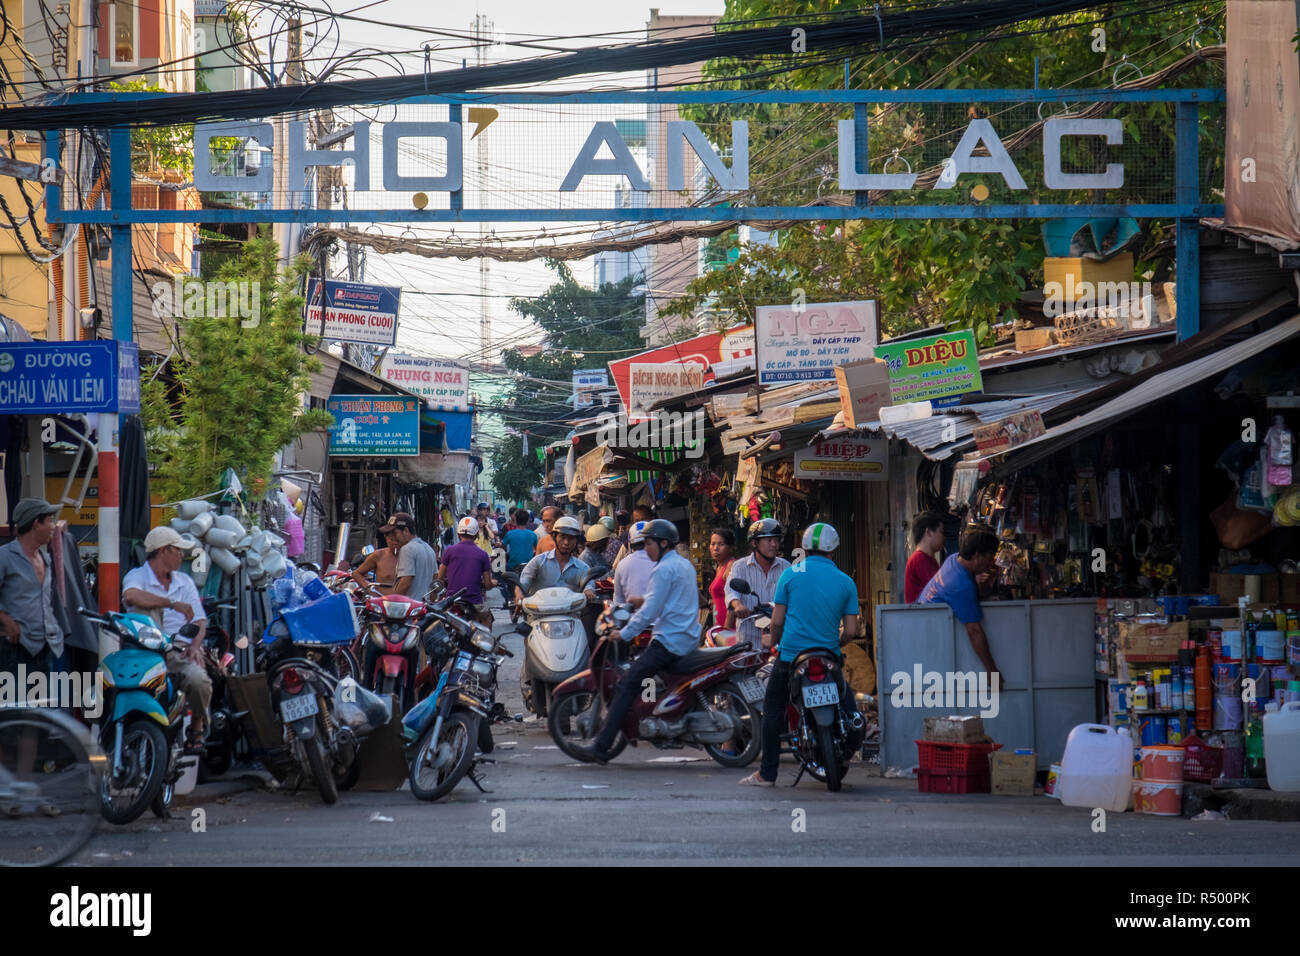 The entrance to Cho An Lac Market, Can Tho, Vietnam Stock Photo